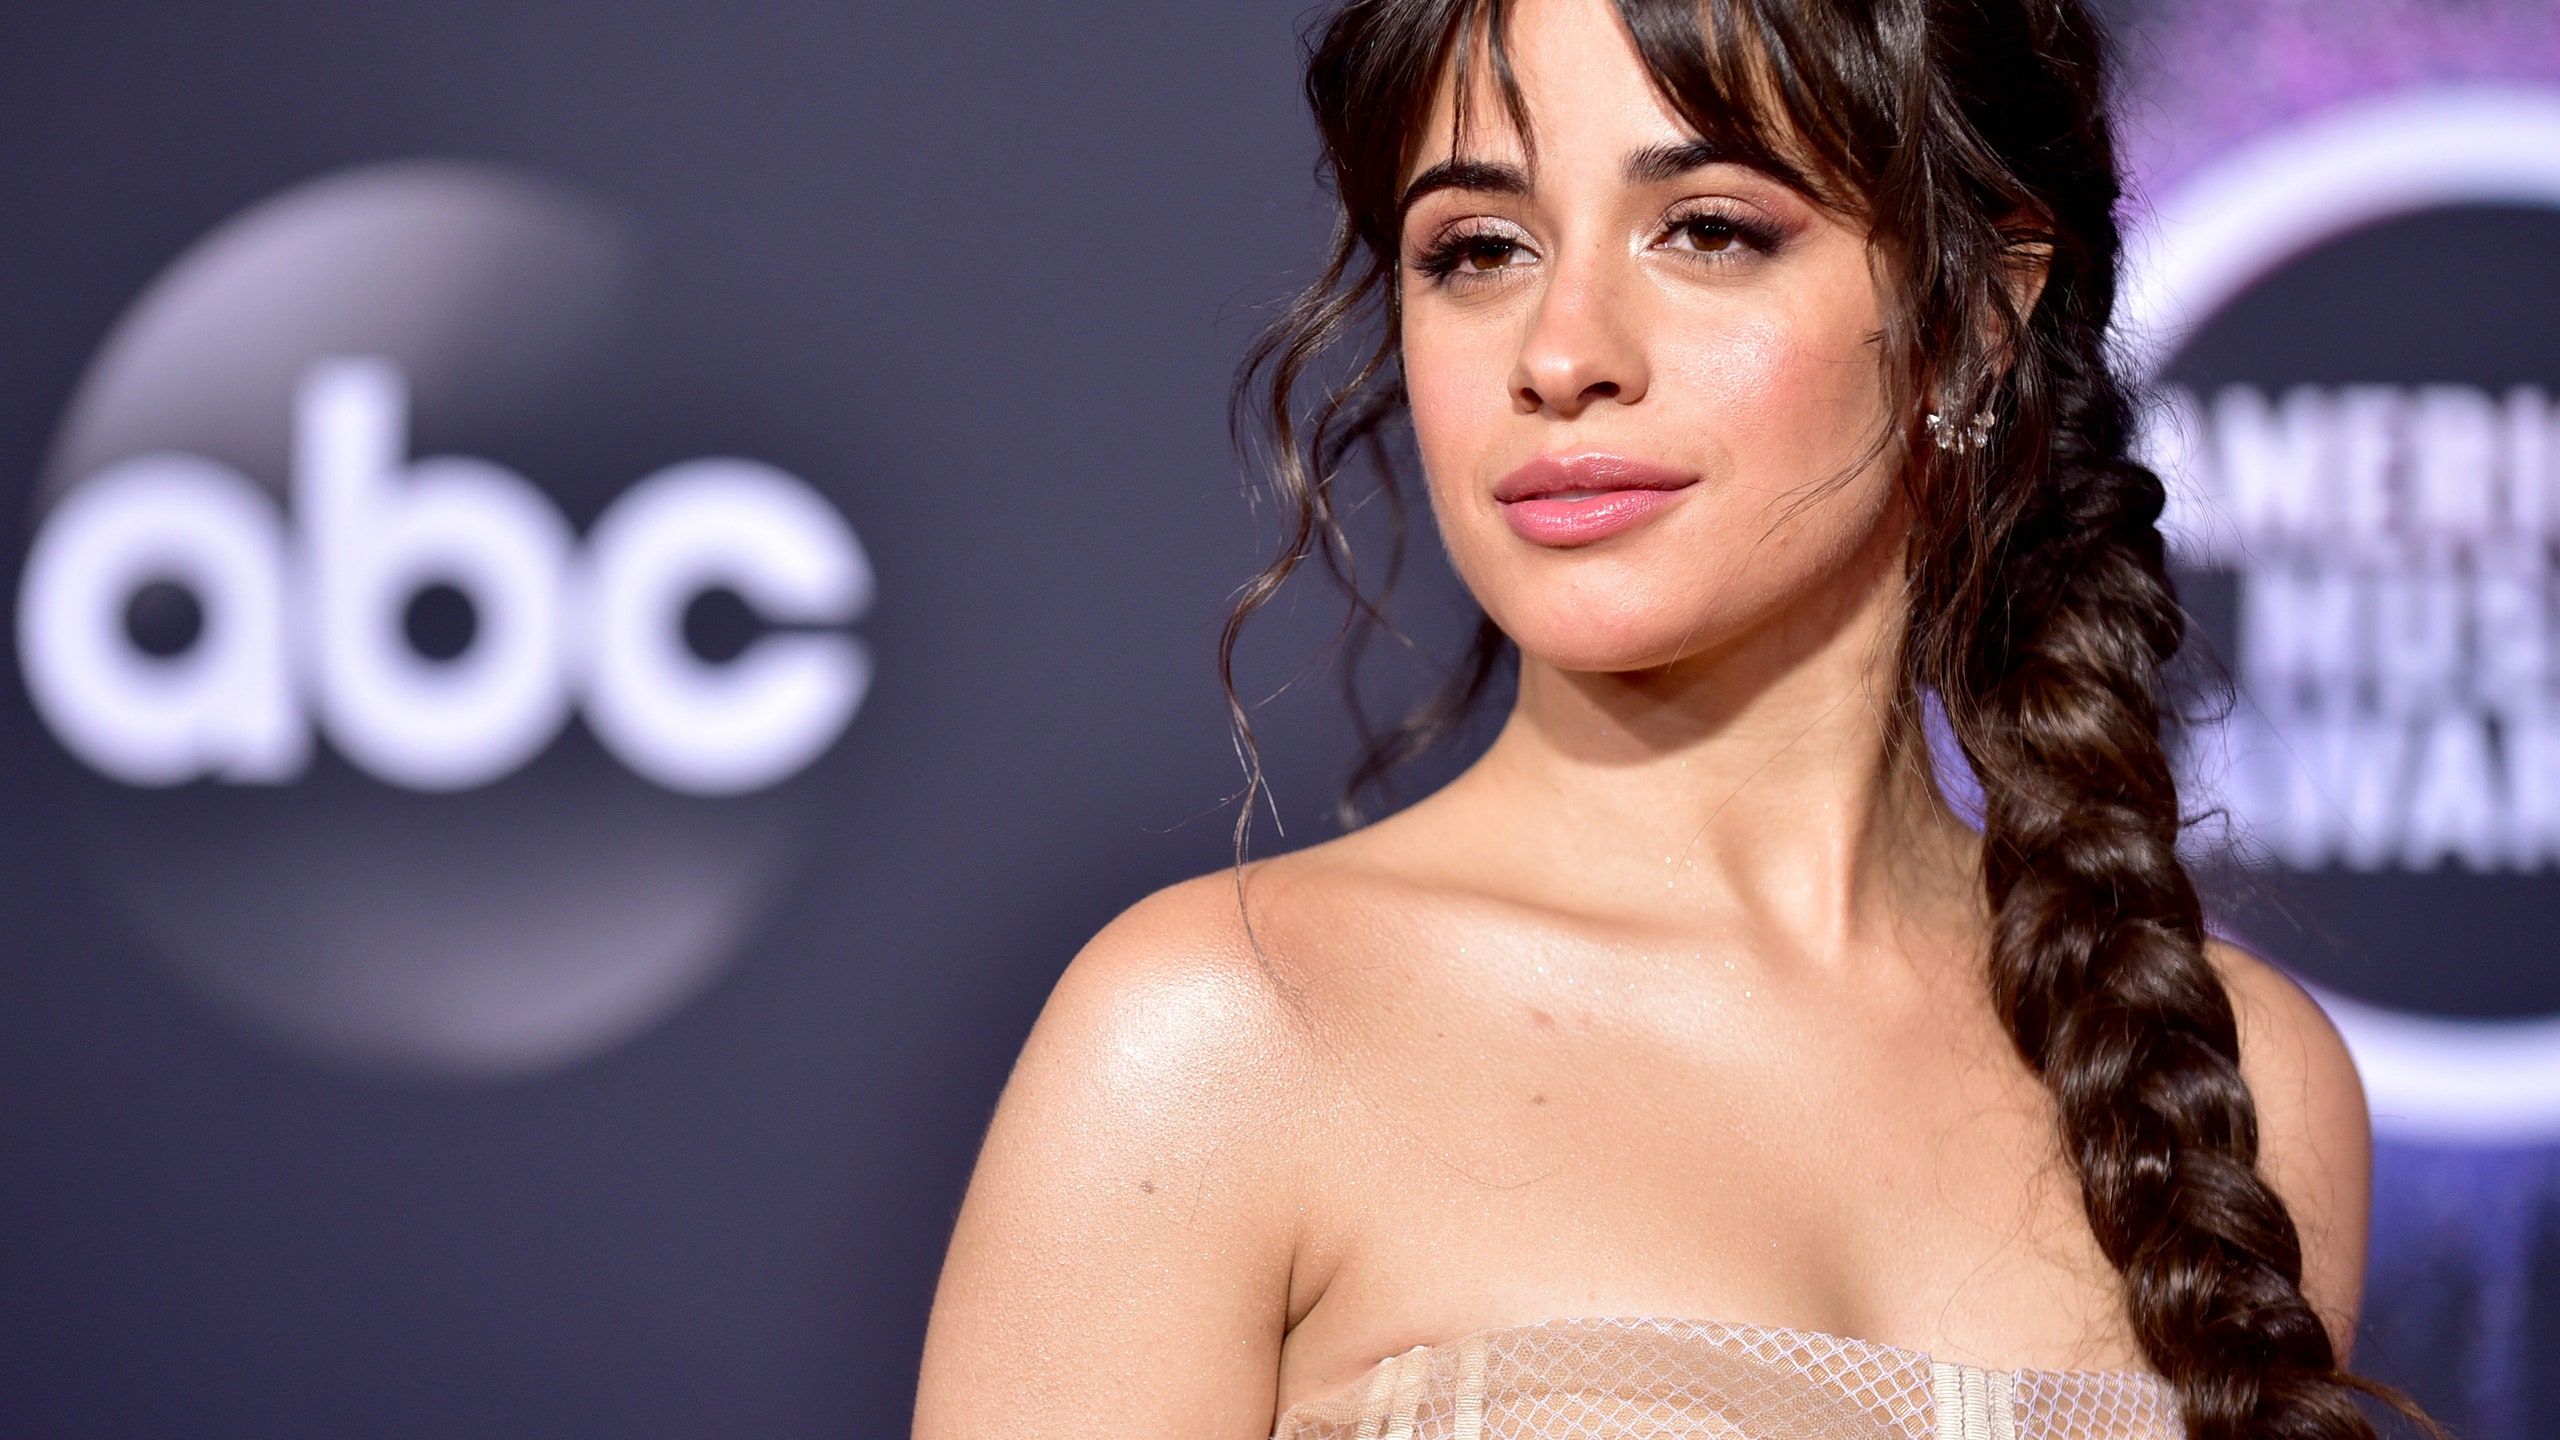 Camila Cabello Says She's Been Attending Weekly Racial Healing Sessions